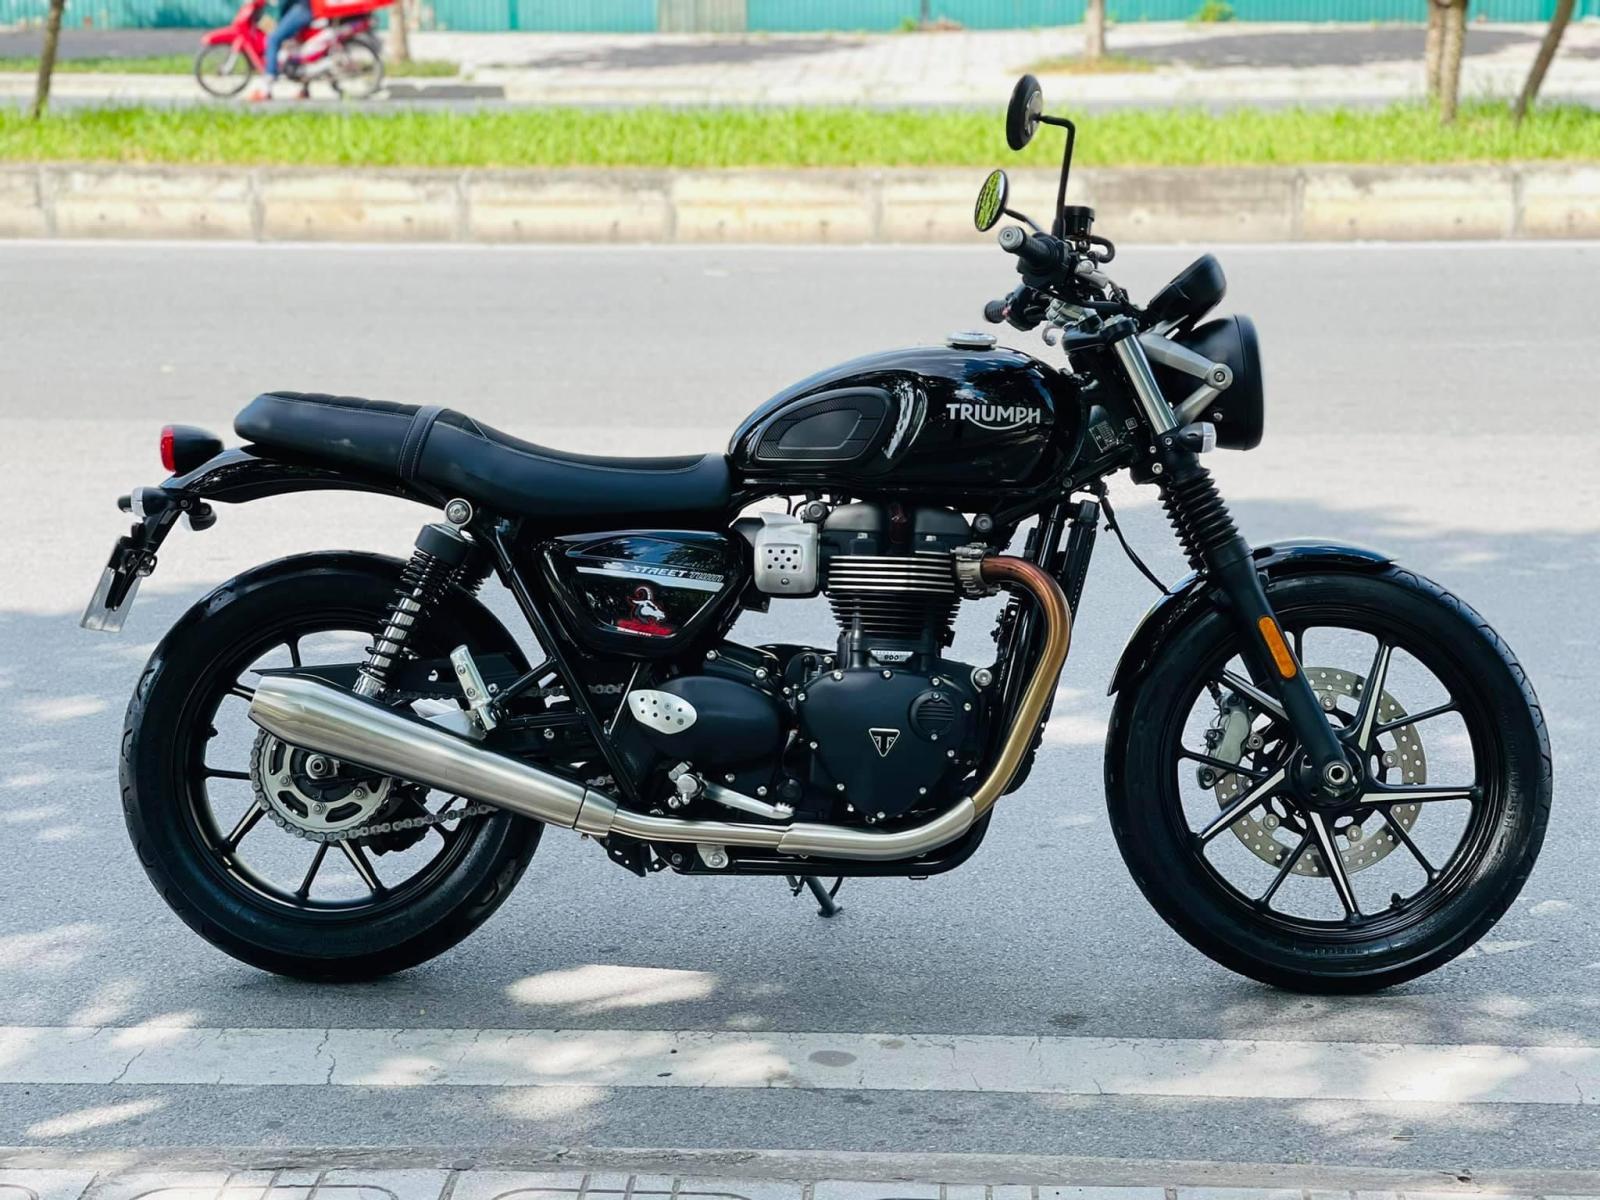 Certified PreOwned 2020 Triumph Street Twin Matte Ironstone  Motorcycles  in North Miami Beach FL  TRI968217